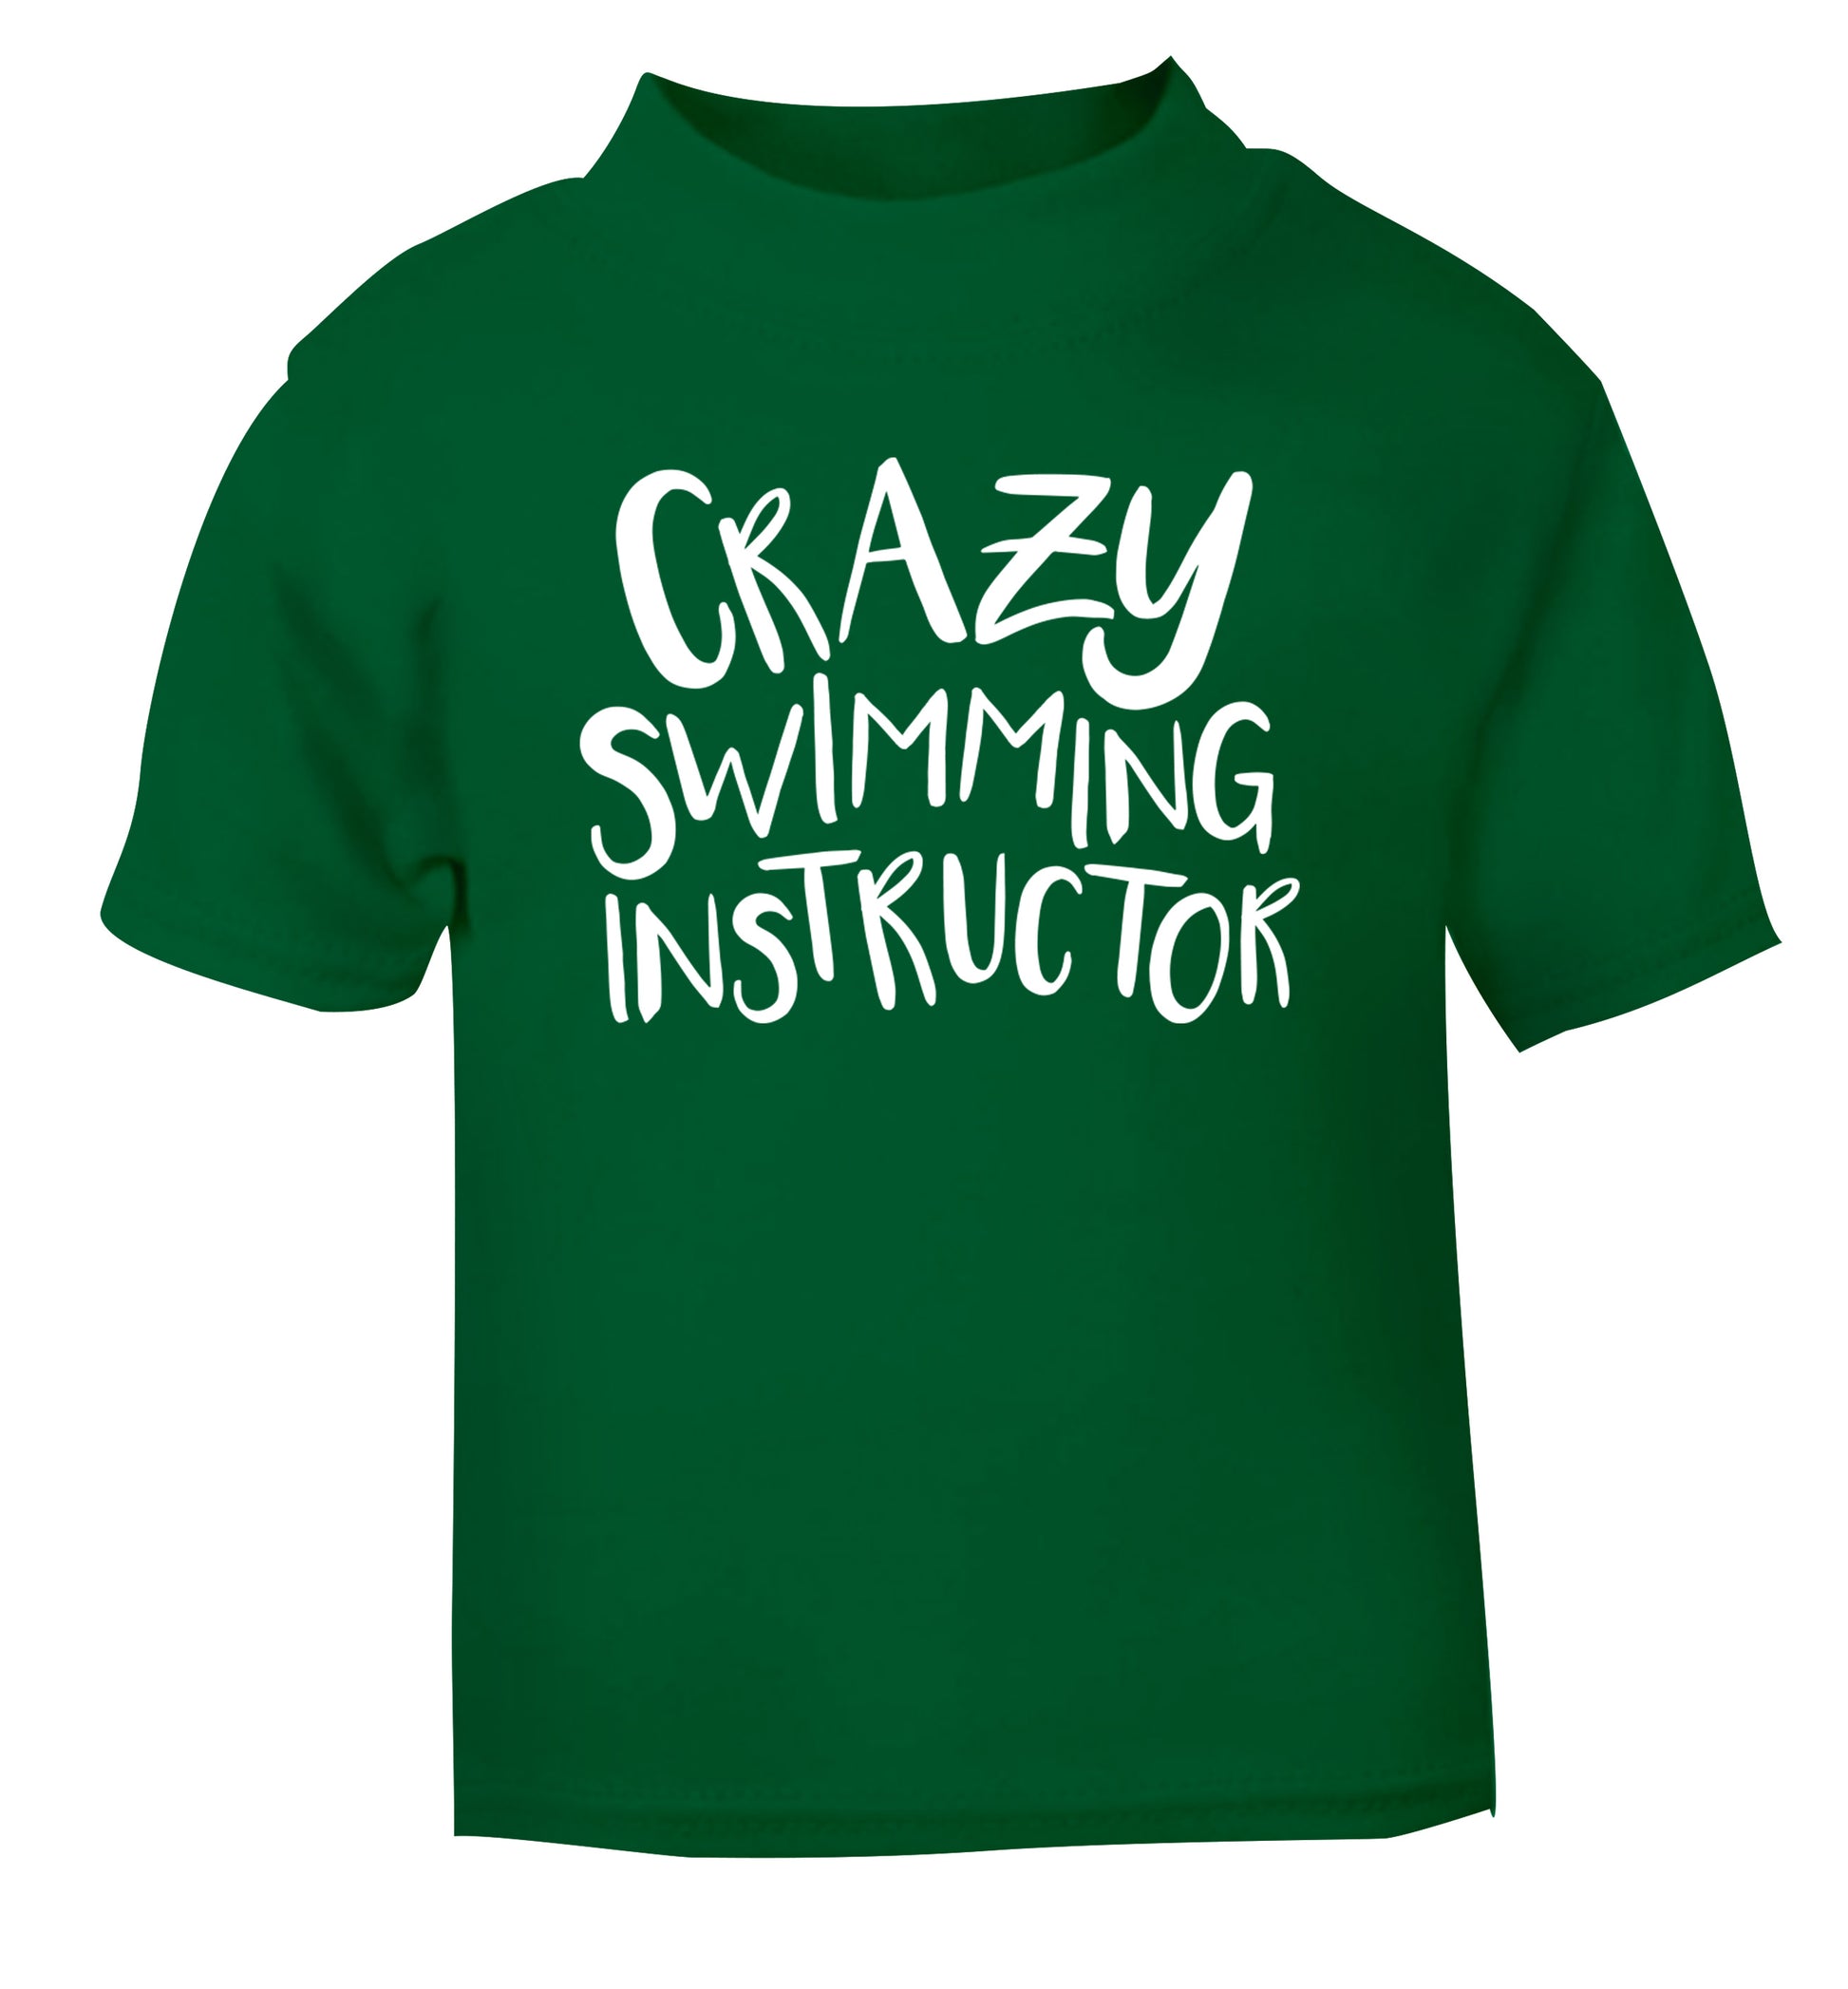 Crazy swimming instructor green Baby Toddler Tshirt 2 Years